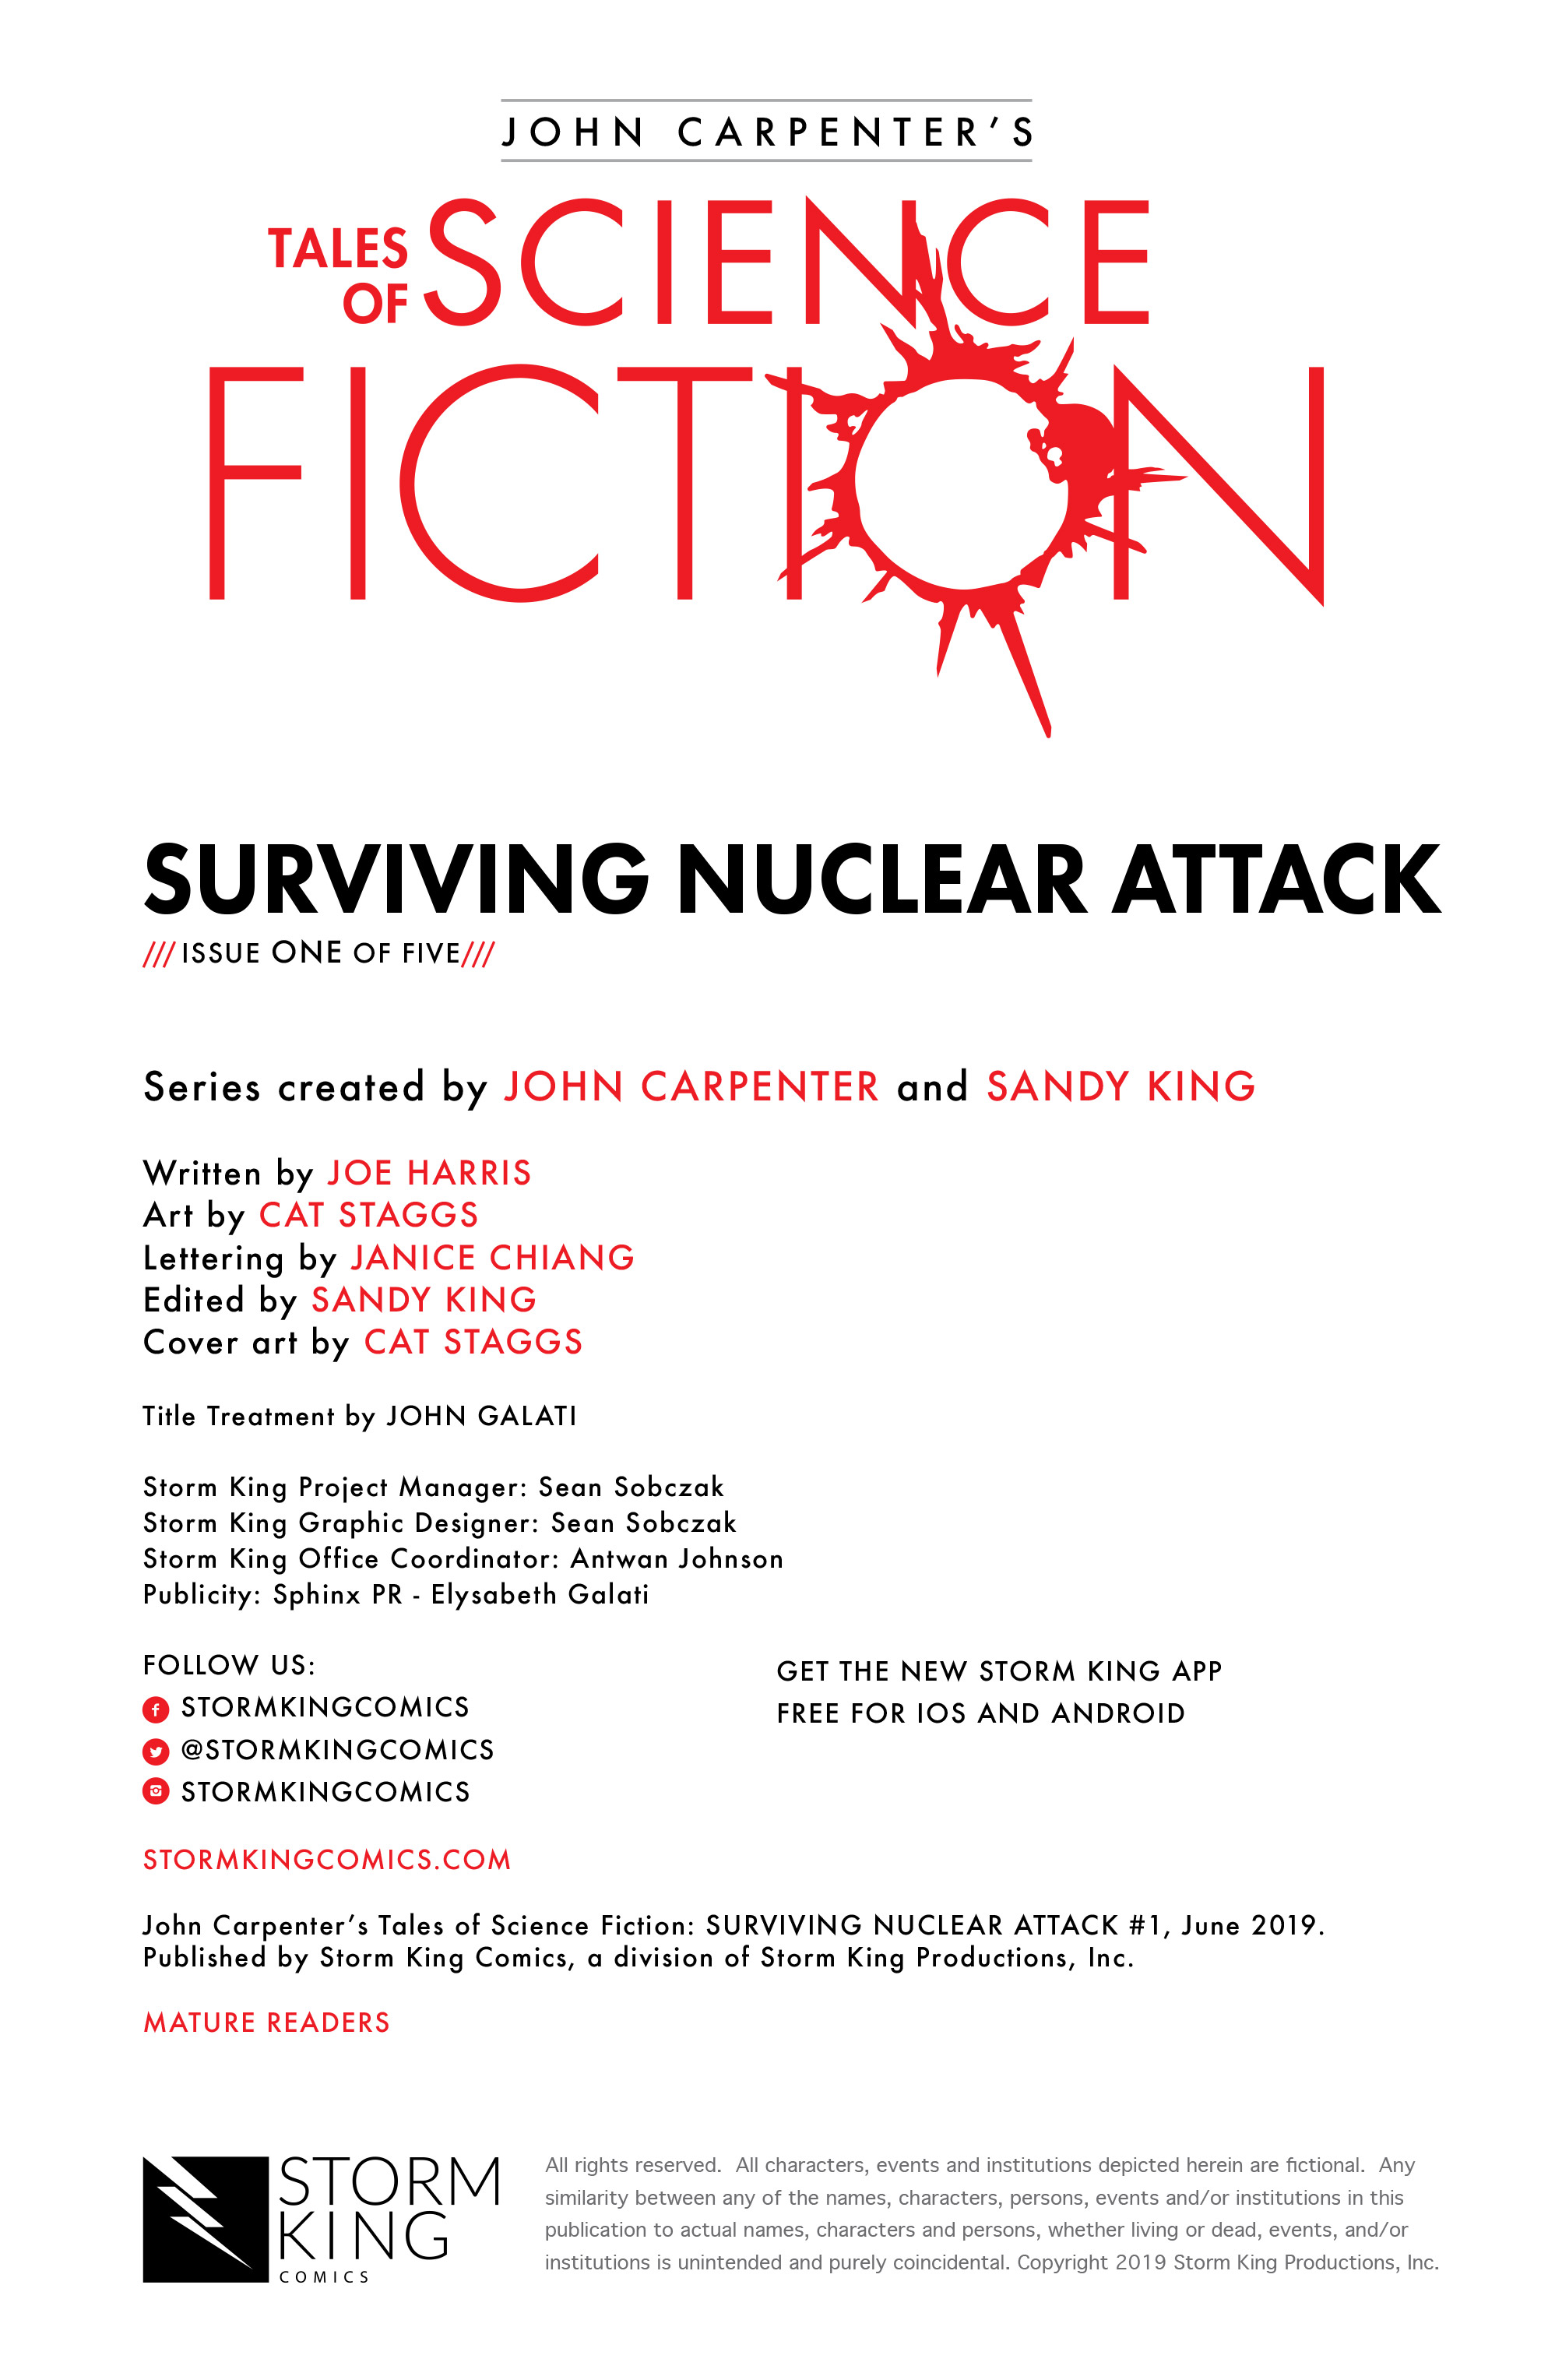 Read online John Carpenter's Tales of Science Fiction: Surviving Nuclear Attack comic -  Issue #1 - 2